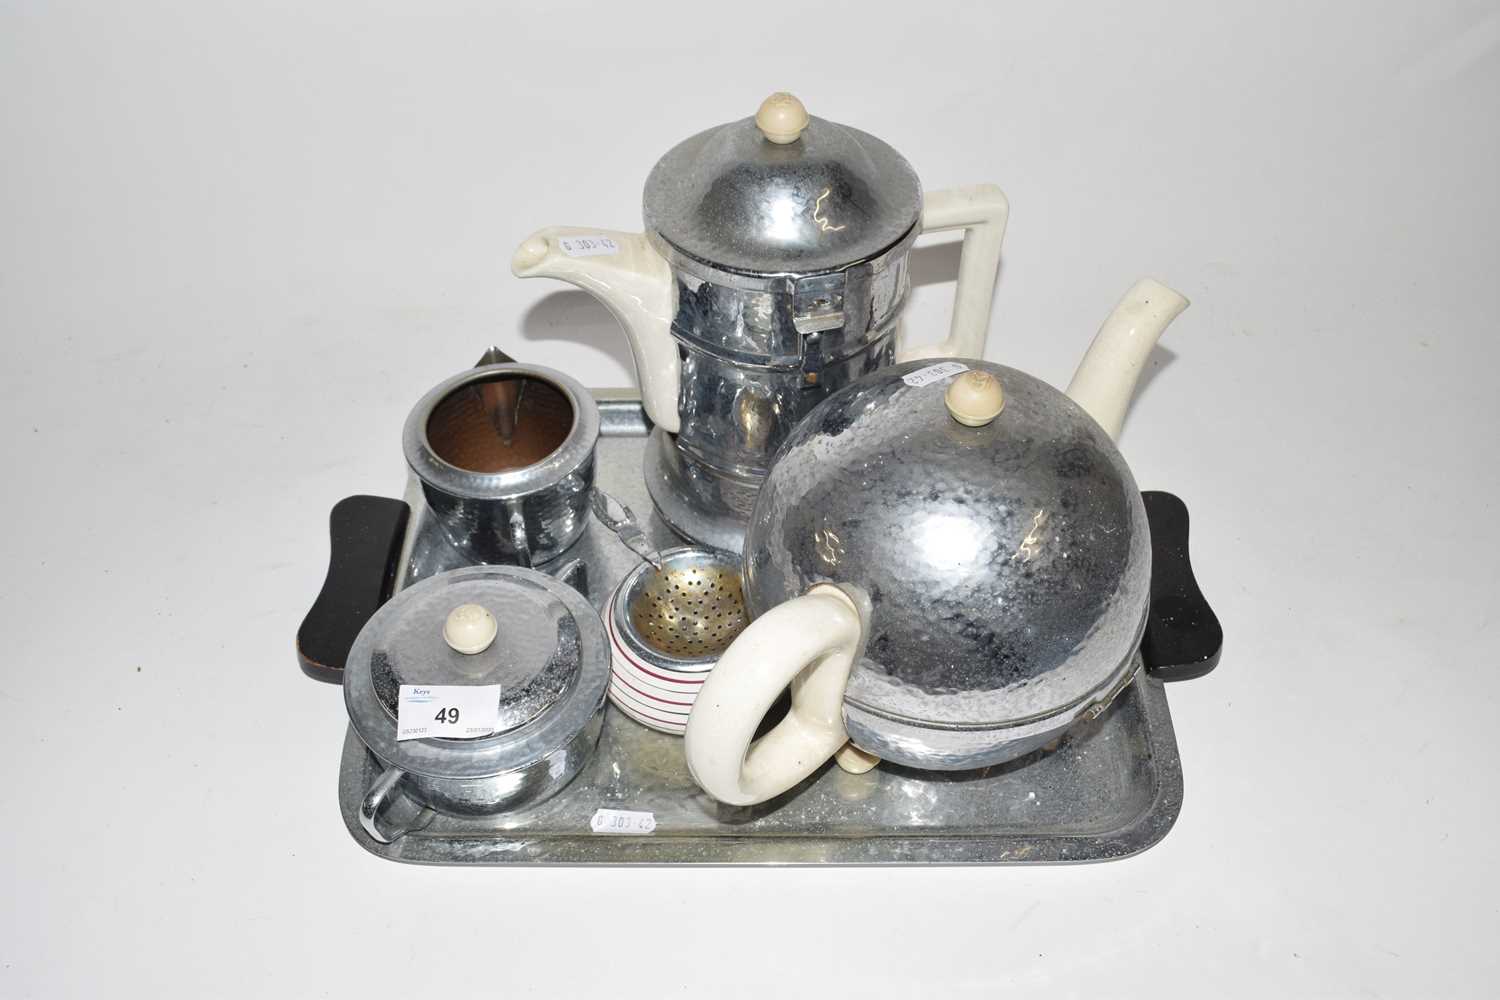 Vintage Heatmaster teaset with accompanying tray - Image 2 of 2